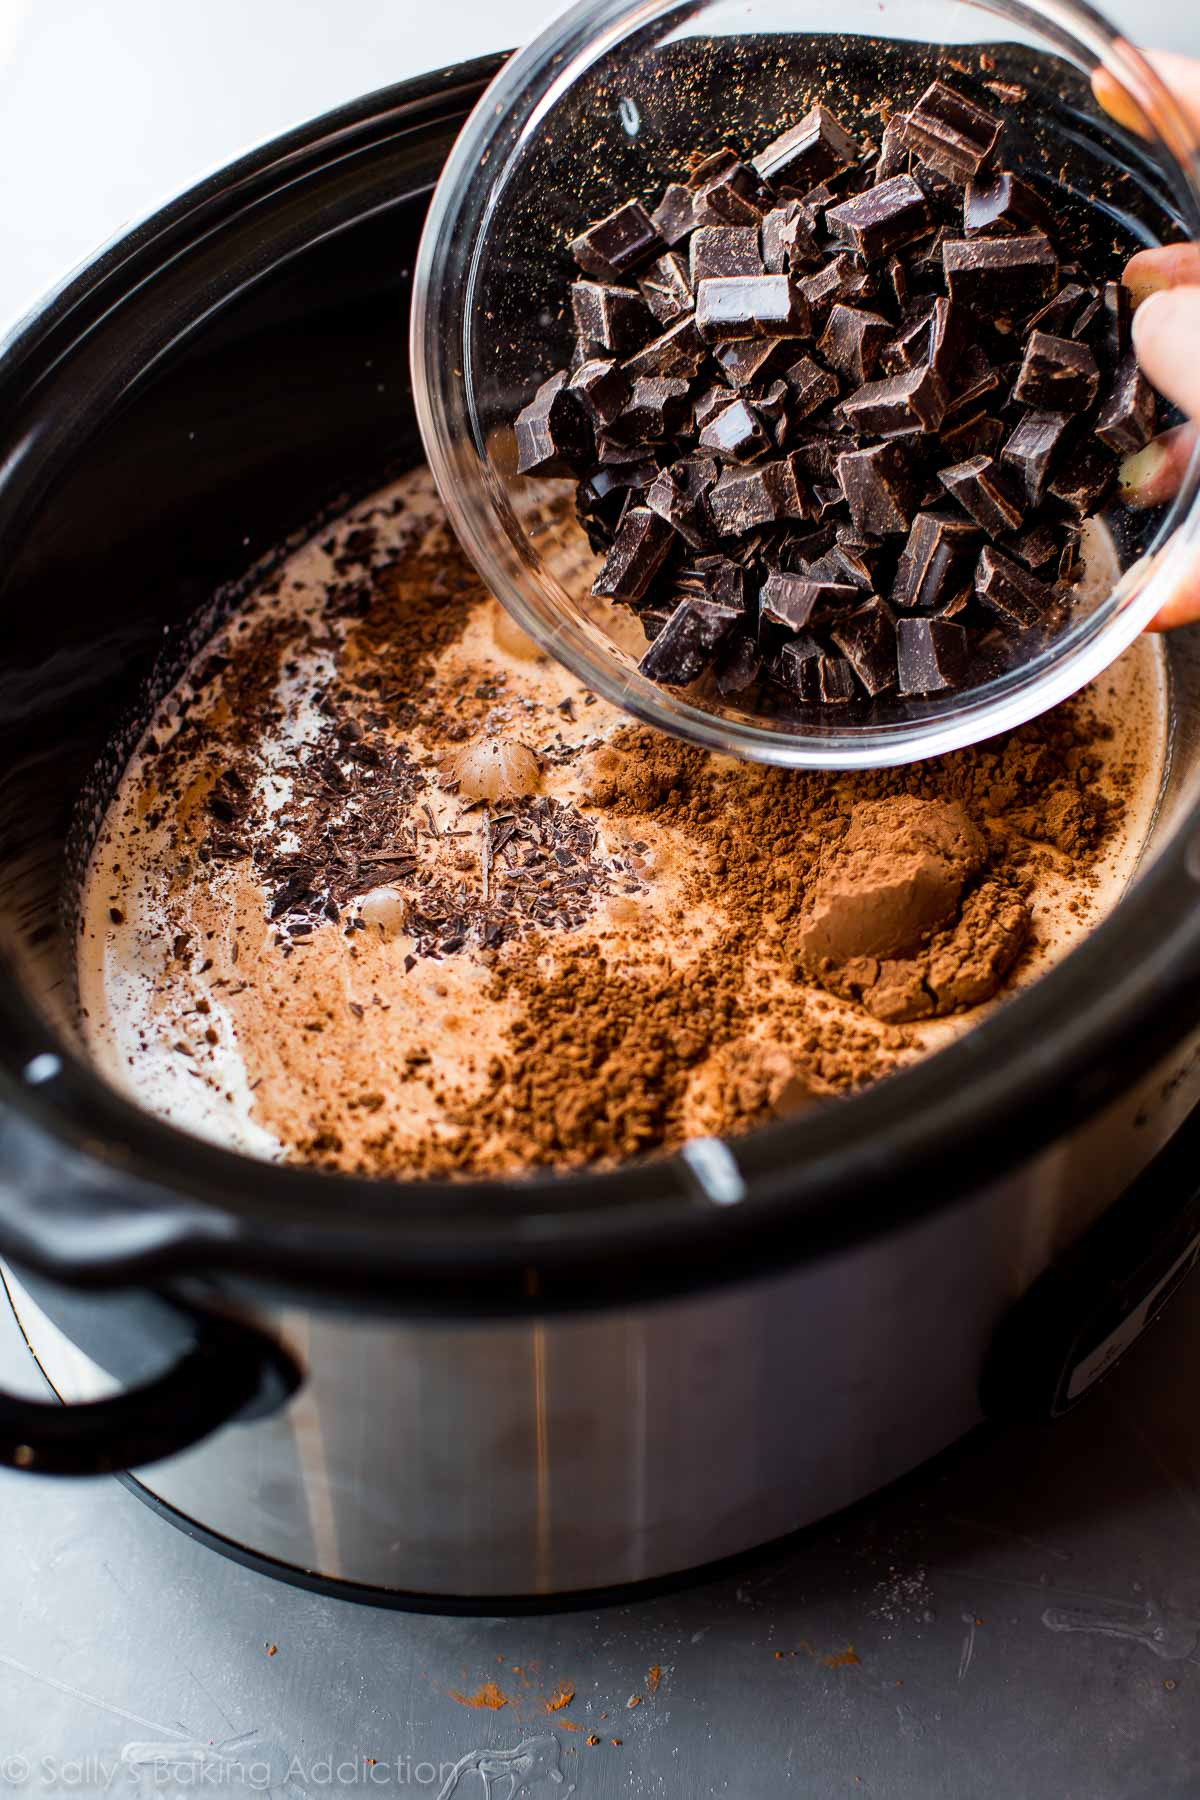 Easy Crockpot Hot Chocolate With Cocoa Powder
 Decadent Slow Cooker Hot Chocolate Sallys Baking Addiction